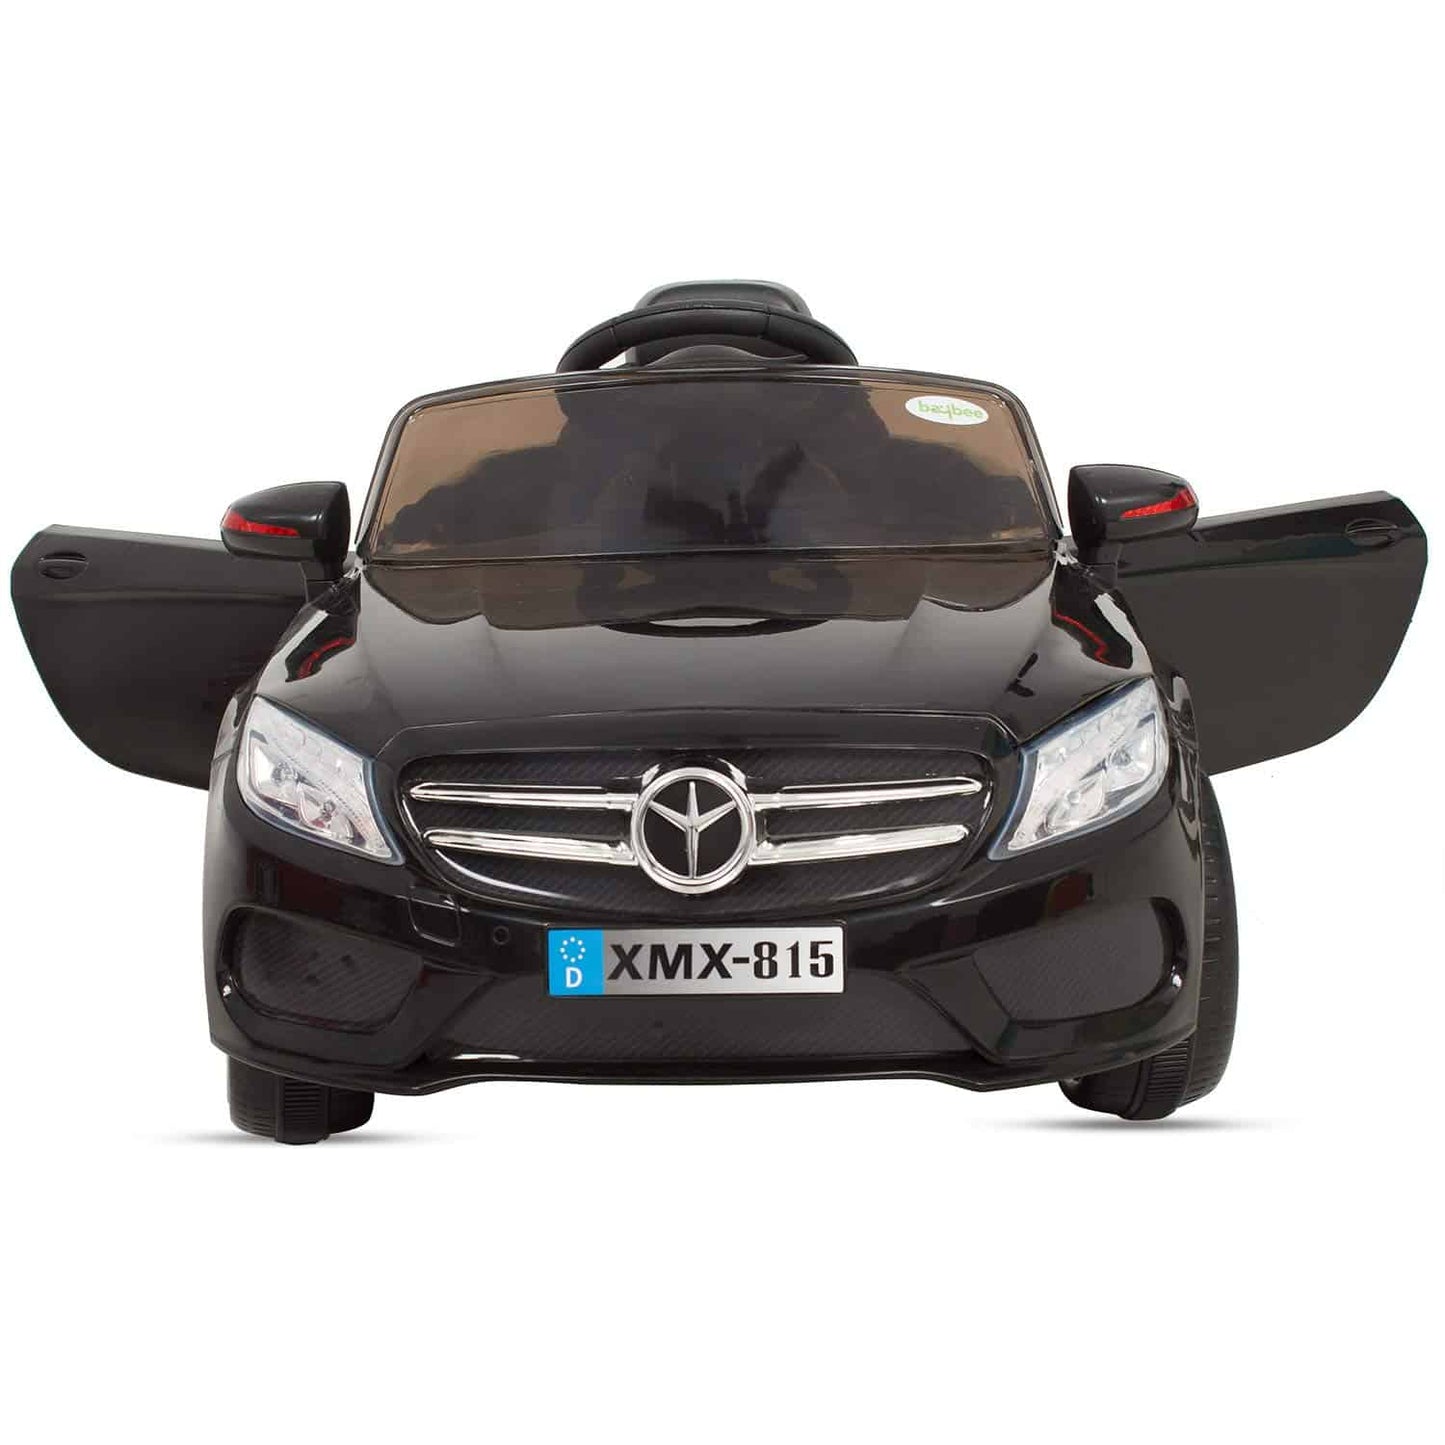 Rechargeable Battery Operated car Ride-on Car with Parental Remote Control for Kids (Black)